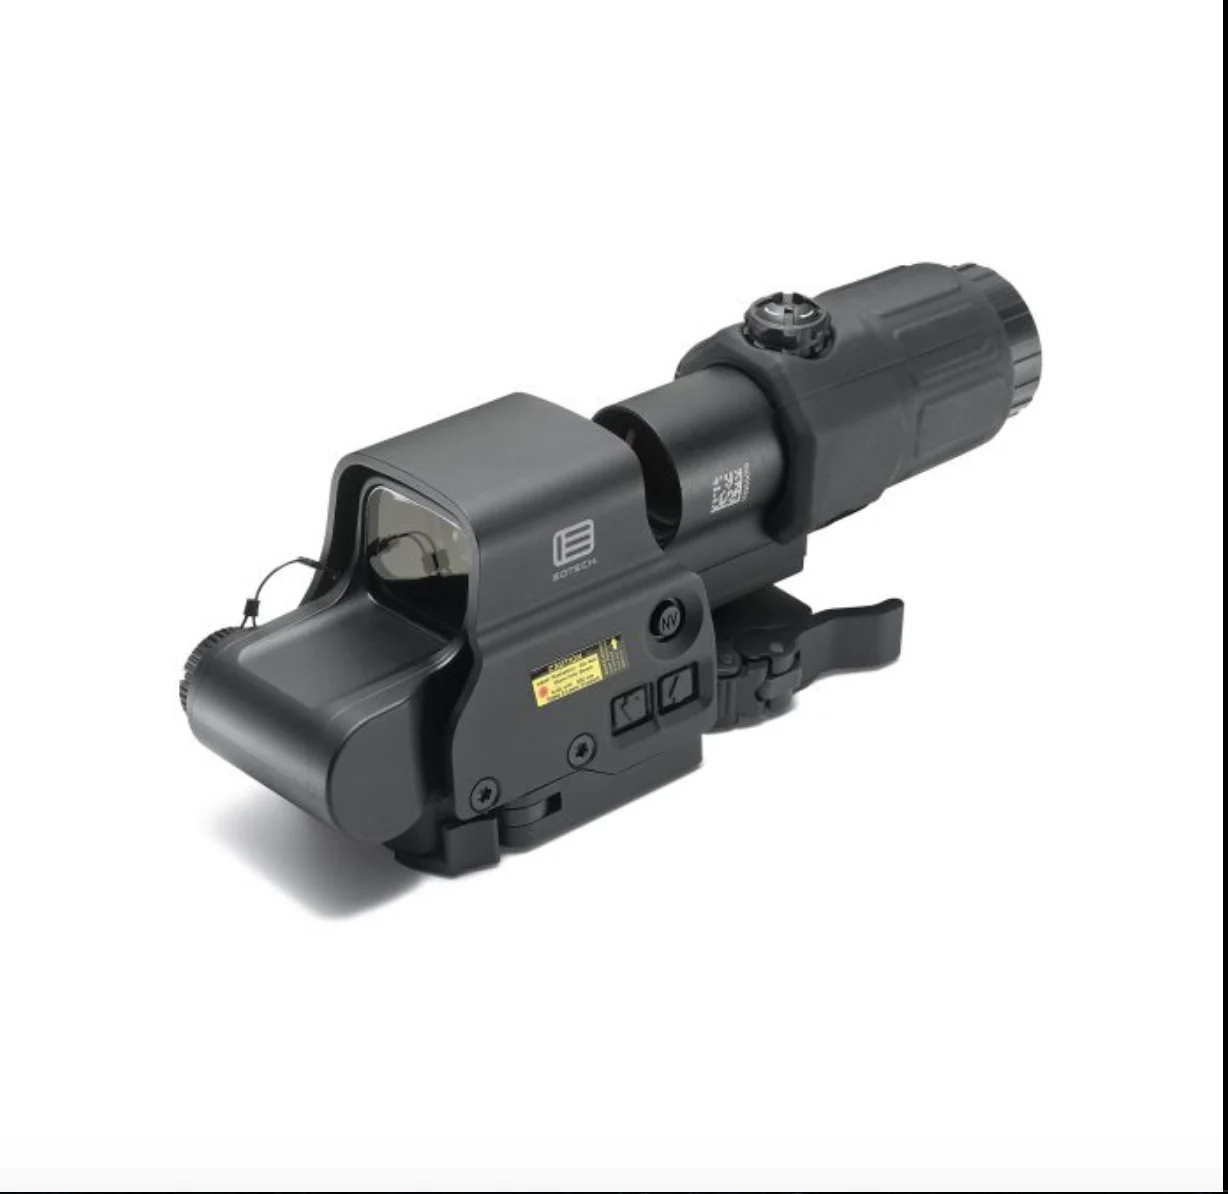 

558 Red Dot Sight G33 3X Magnifier Holographic Scope Hunting 20mm Weaver Rail Mount, Matte black